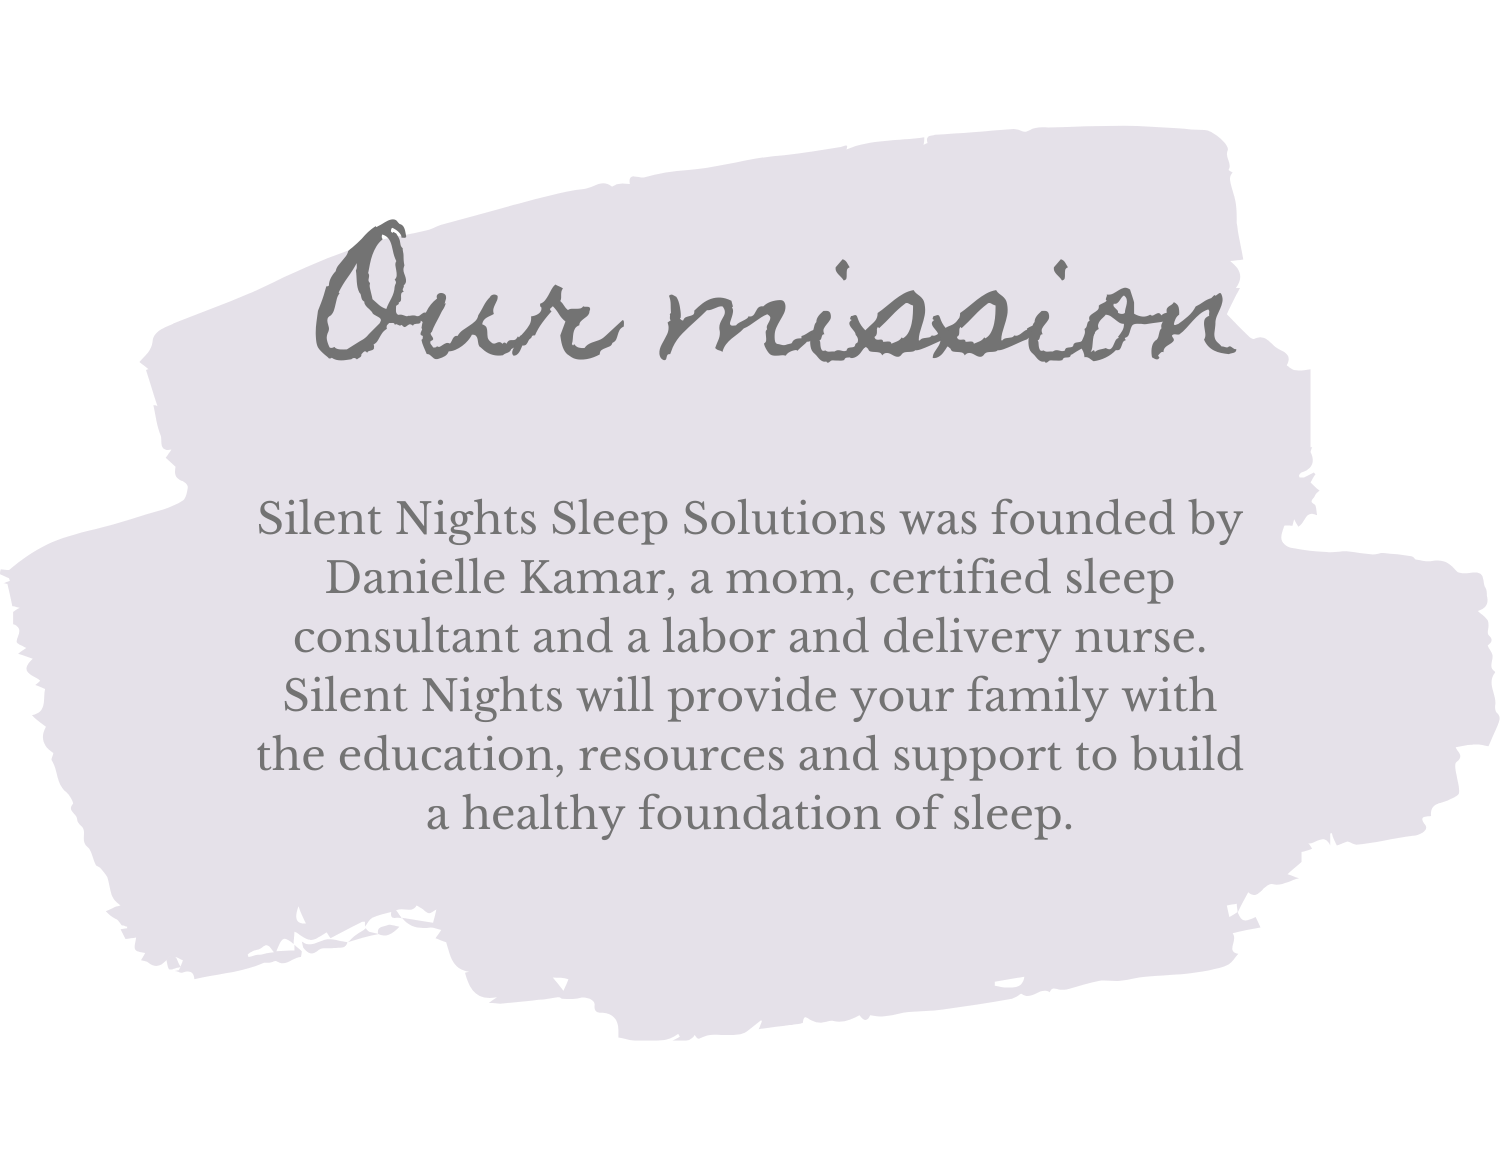 016715001164537-silent-nights-sleep-solutions-was-founded-by-danielle-kamar-a-mom-certified-sl-15866404601384.png